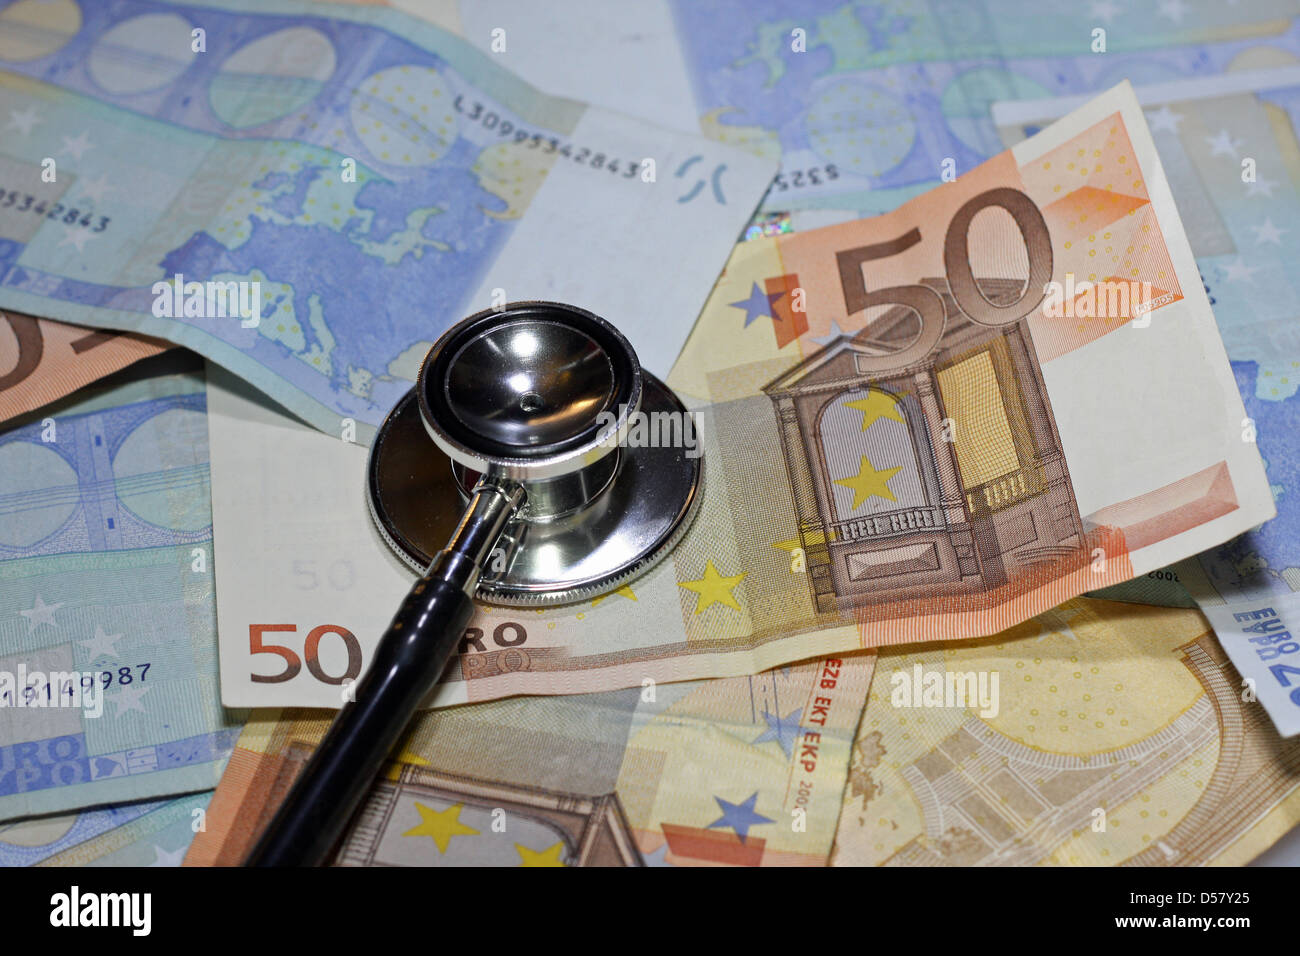 stethoscope doctor leaned on many sick euro currency banknotes Stock Photo